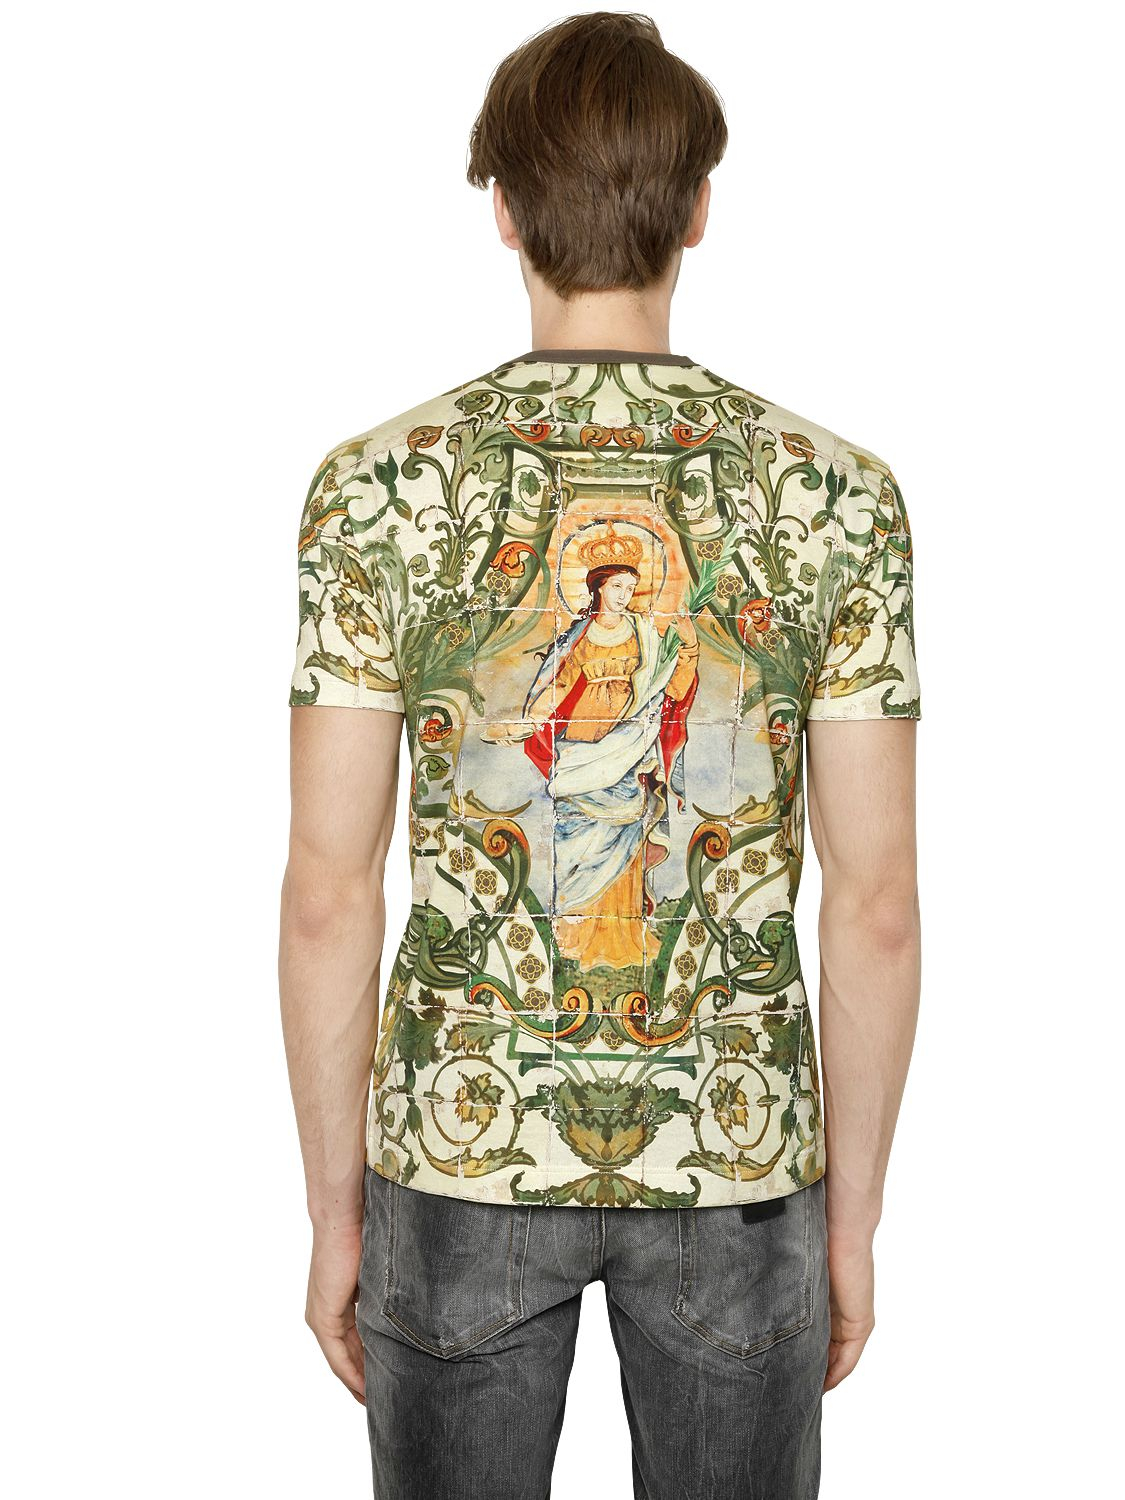 Lyst - Dolce & Gabbana Madonna Printed Cotton T-Shirt in Green for Men